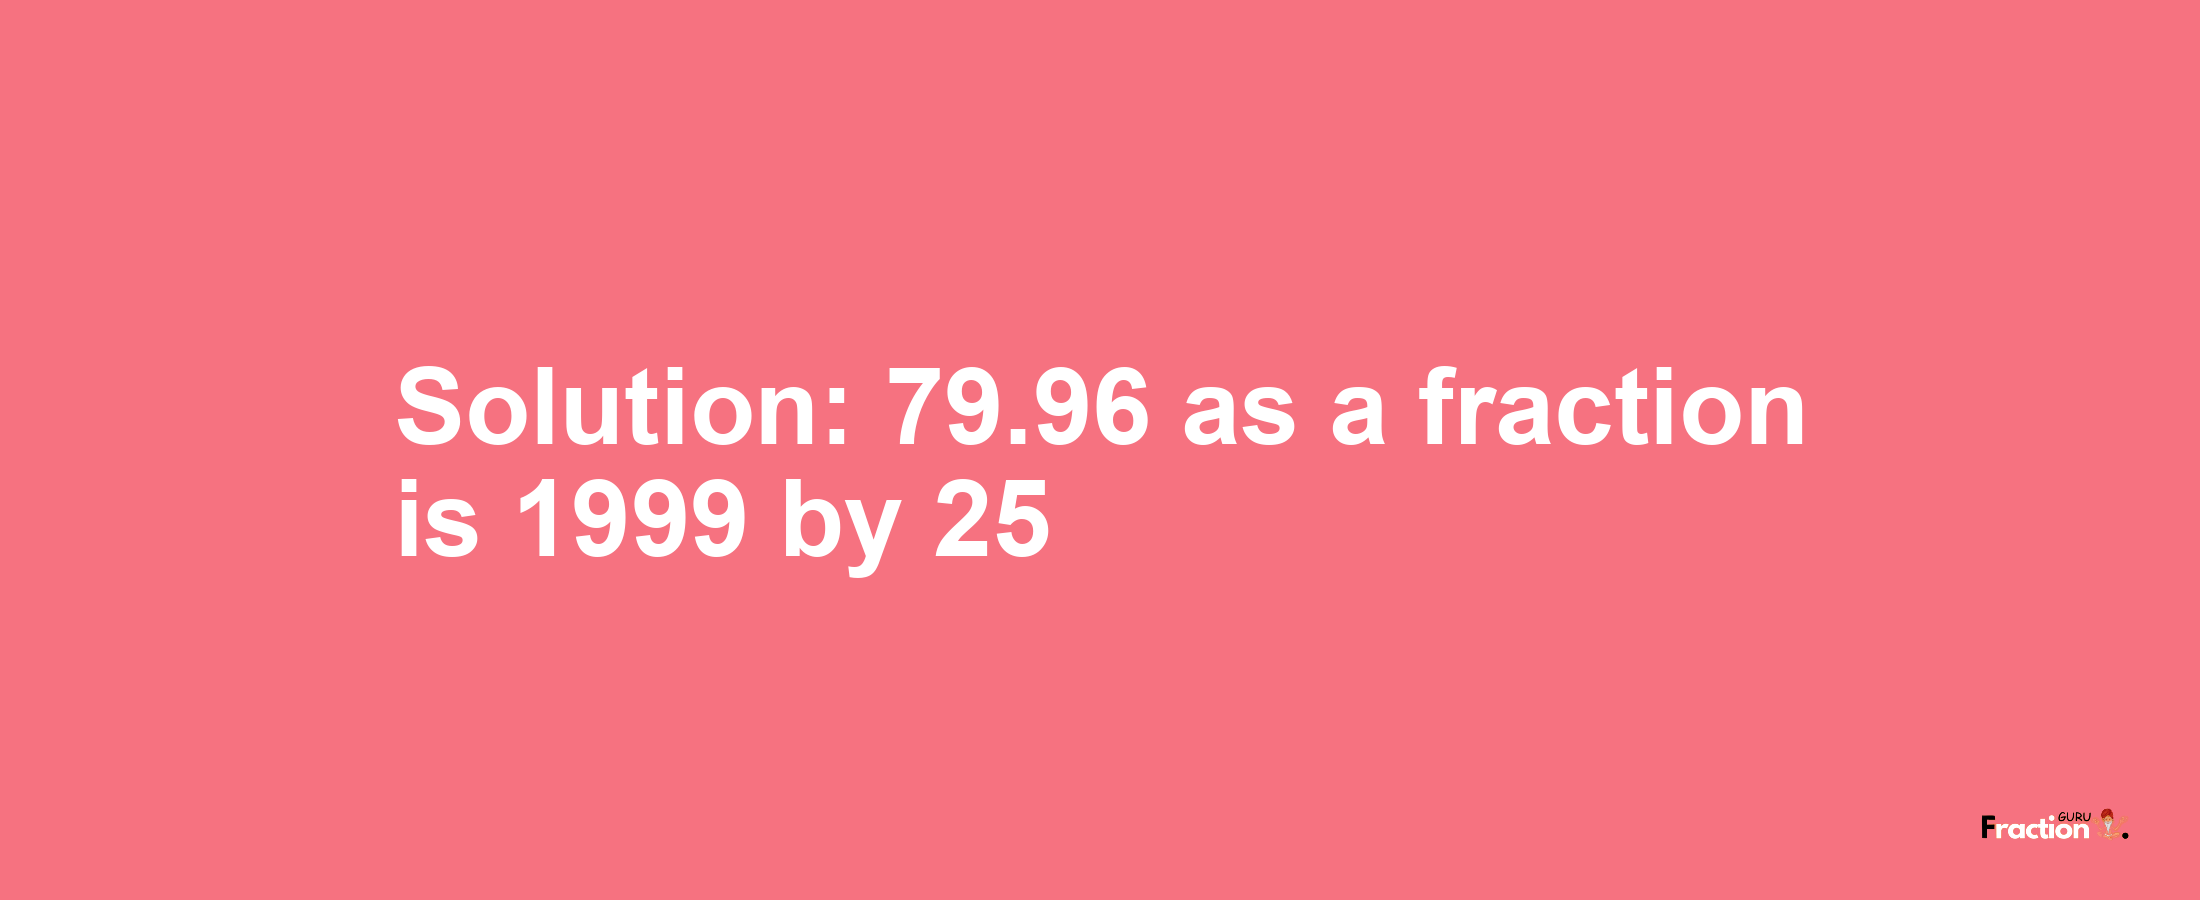 Solution:79.96 as a fraction is 1999/25